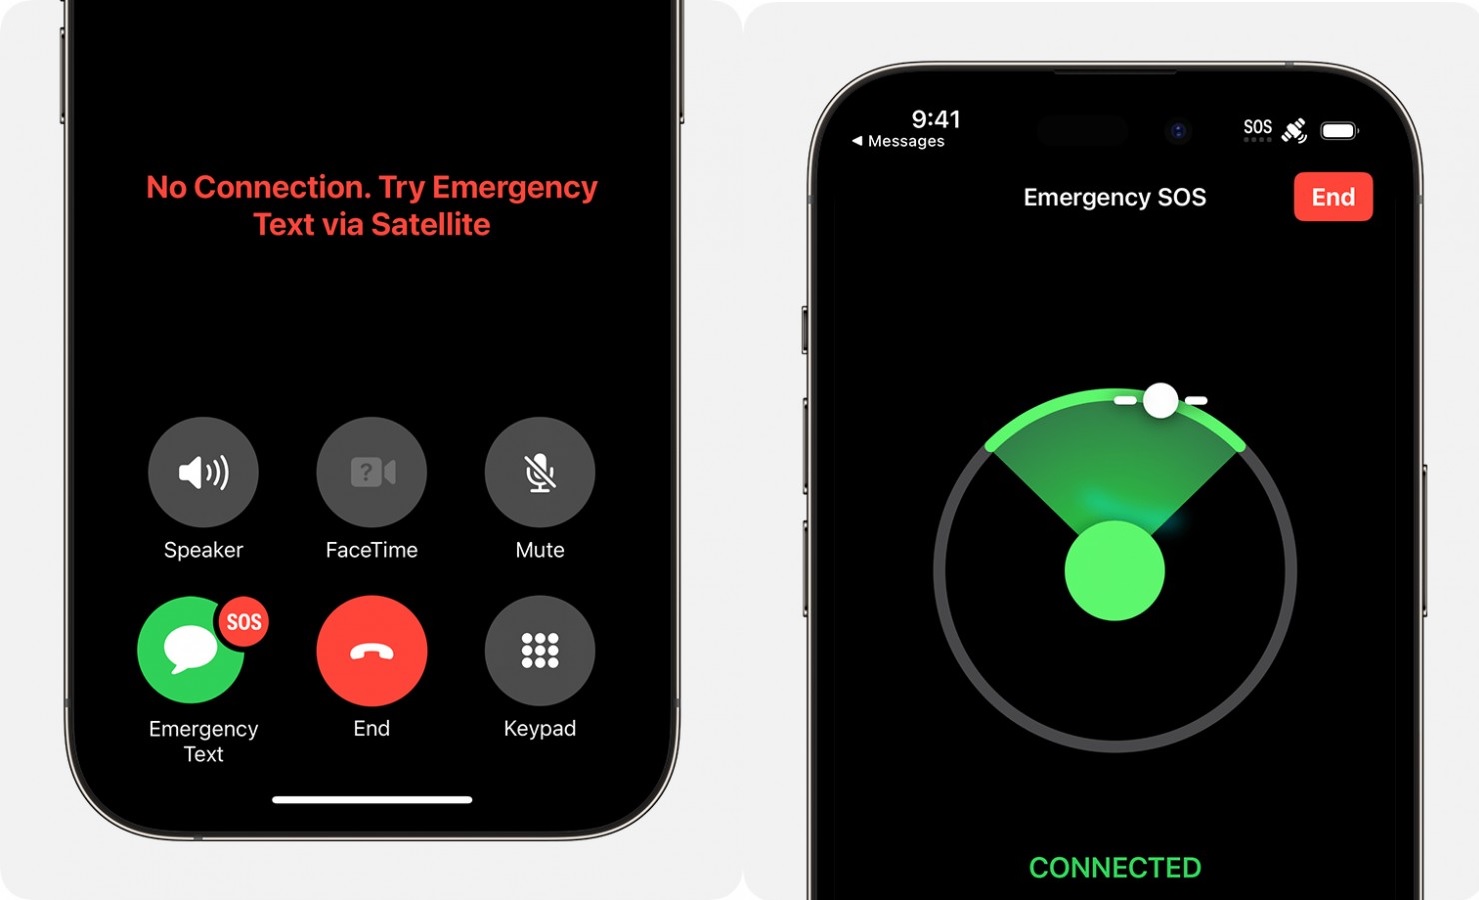 Apple extends free Emergency SOS via satellite for iPhone 14 users